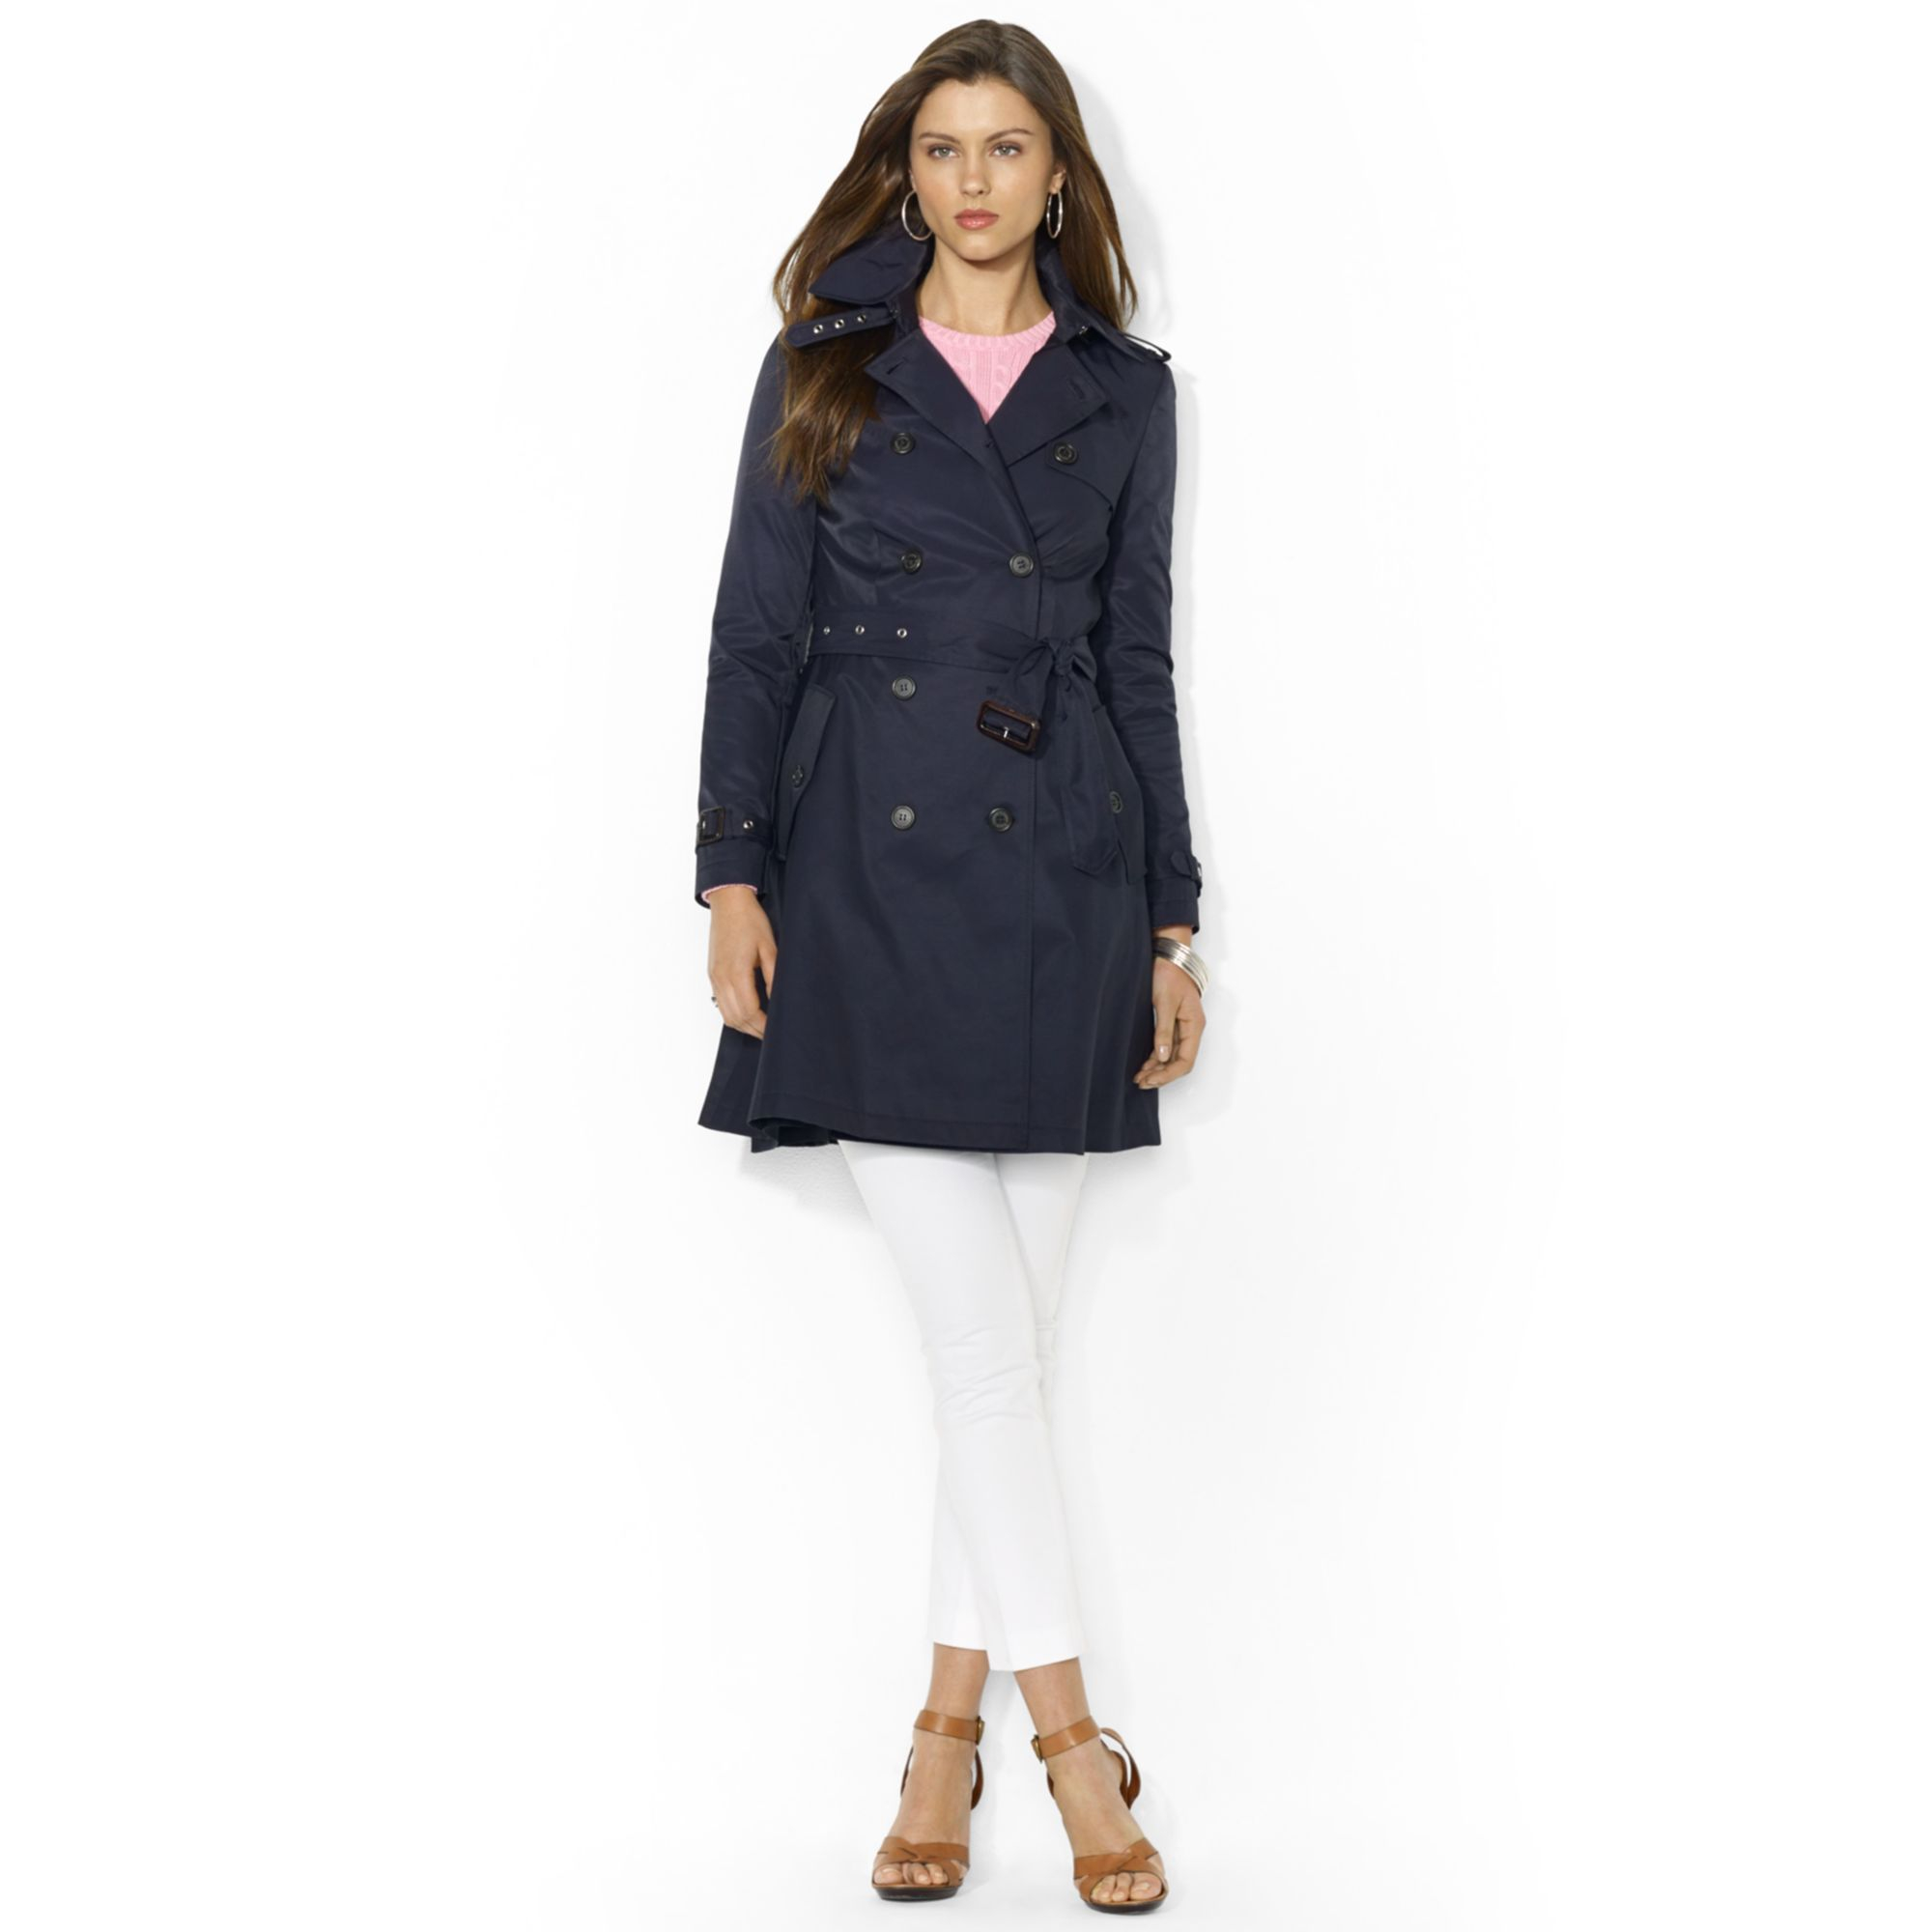 Lauren by Ralph Lauren Double Breasted A-Line Trench Coat in Blue - Lyst